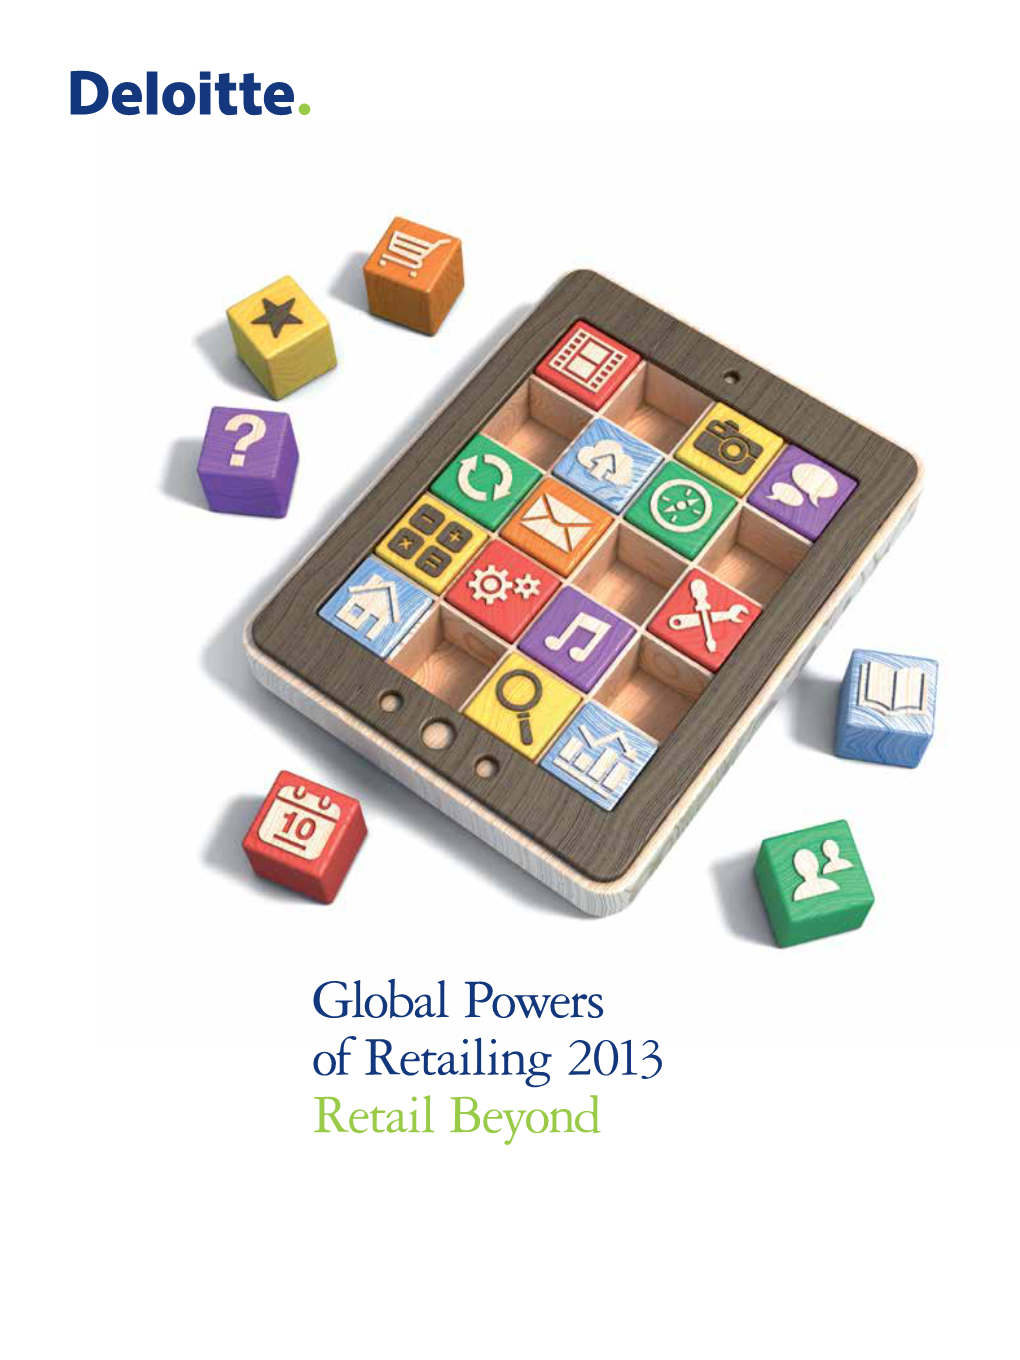 Global Powers of Retailing 2013 Retail Beyond Retail Perspectives from Deloitte